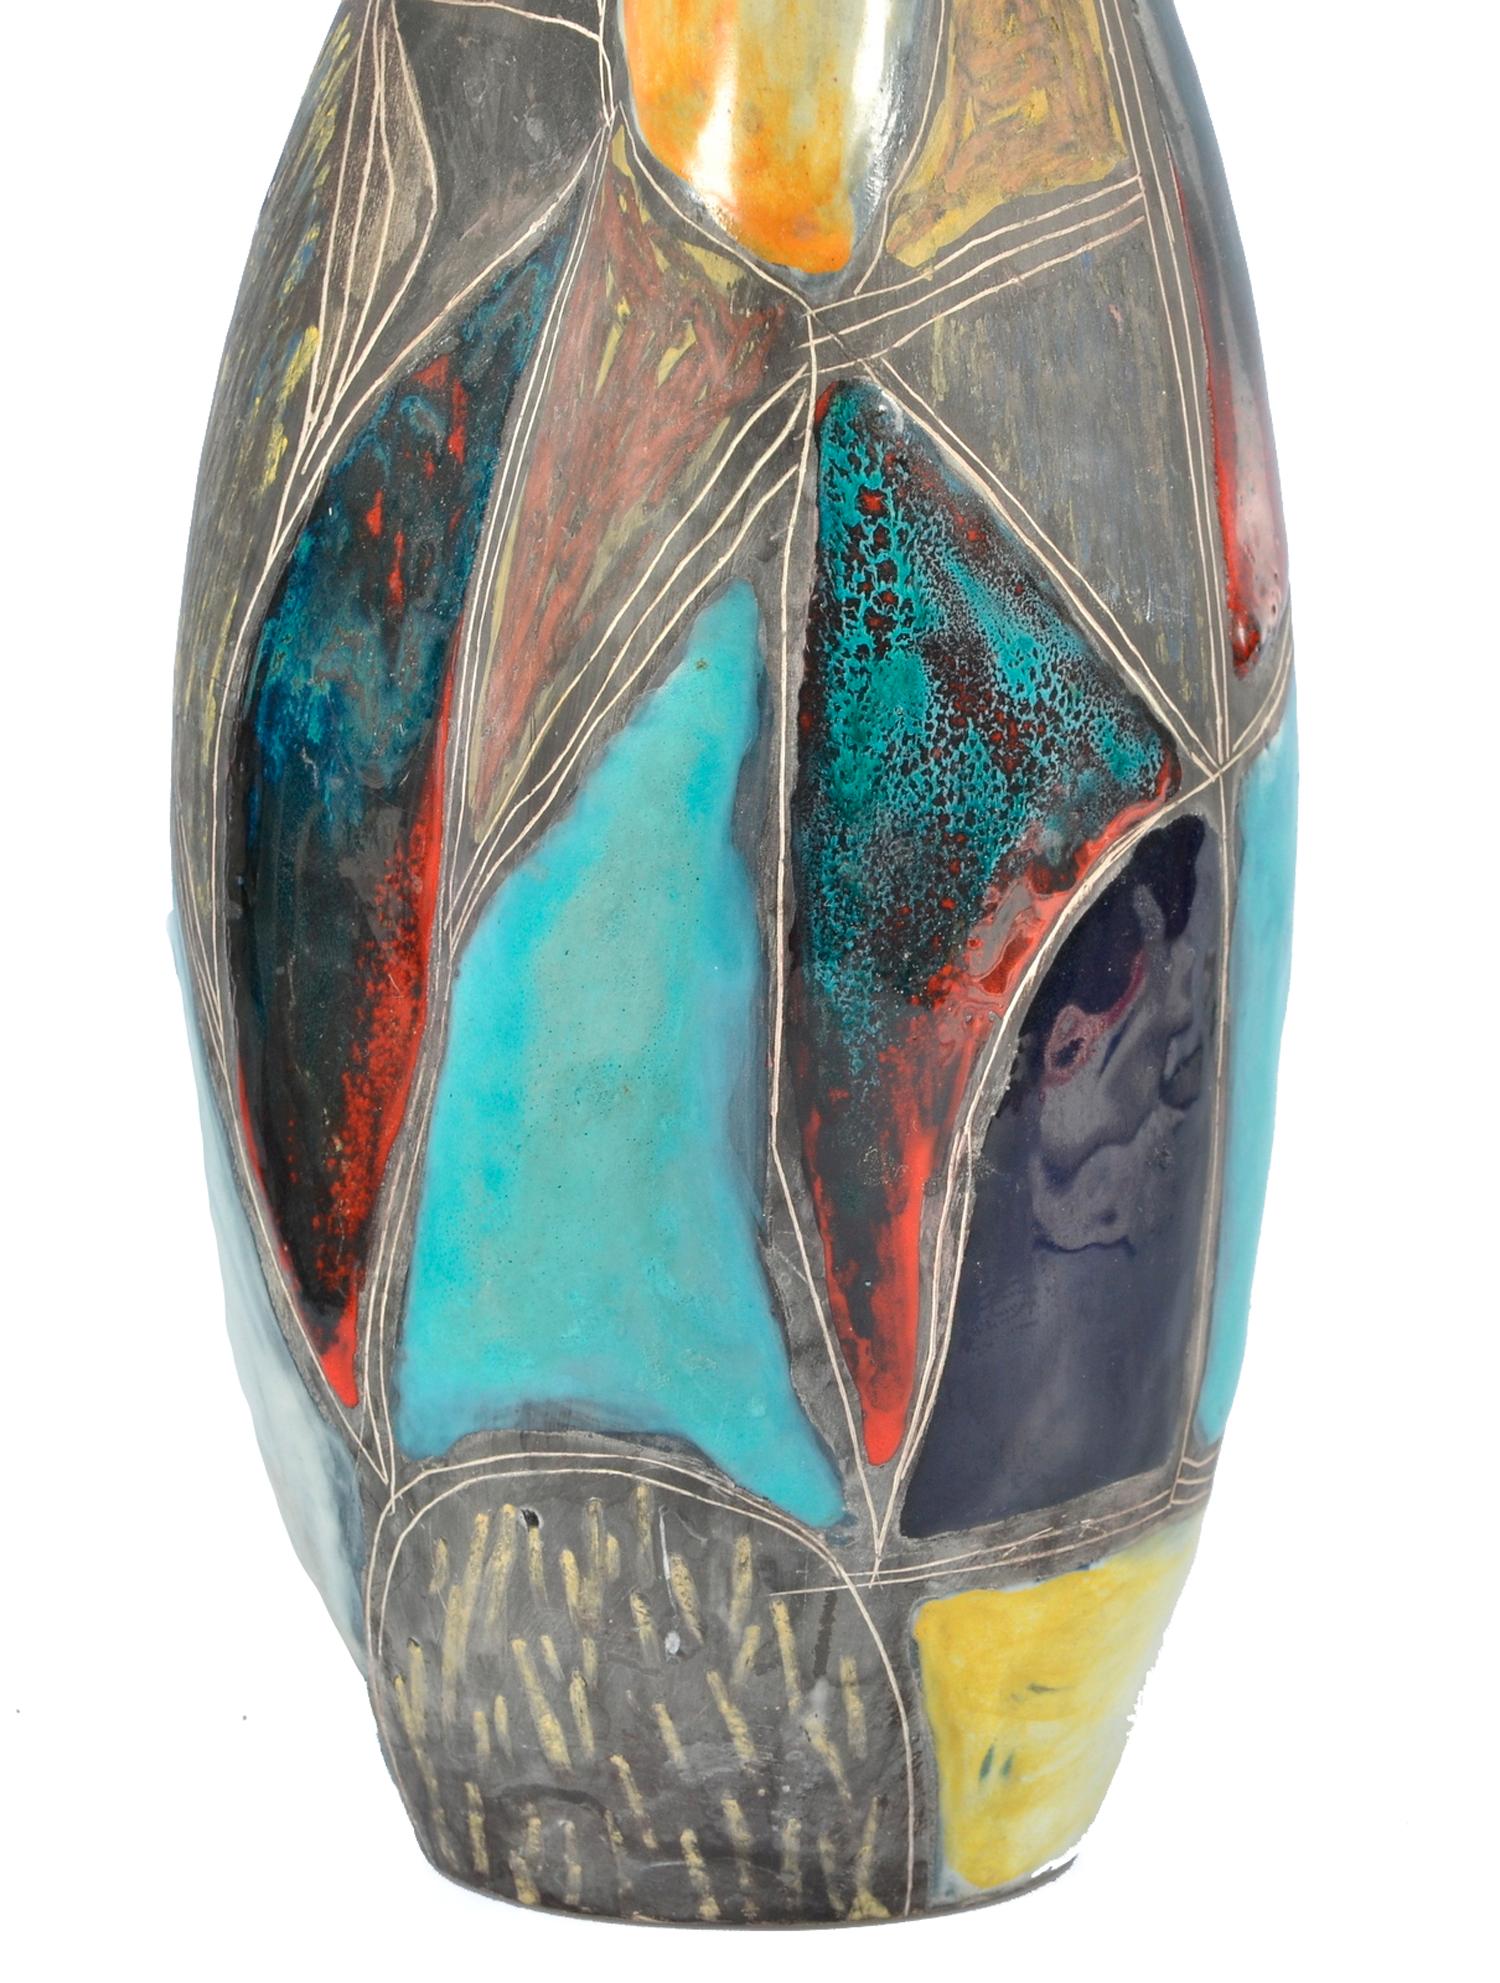 Italian mid-century Marcello Fantoni Studio vase. Made and signed with his typical signature 